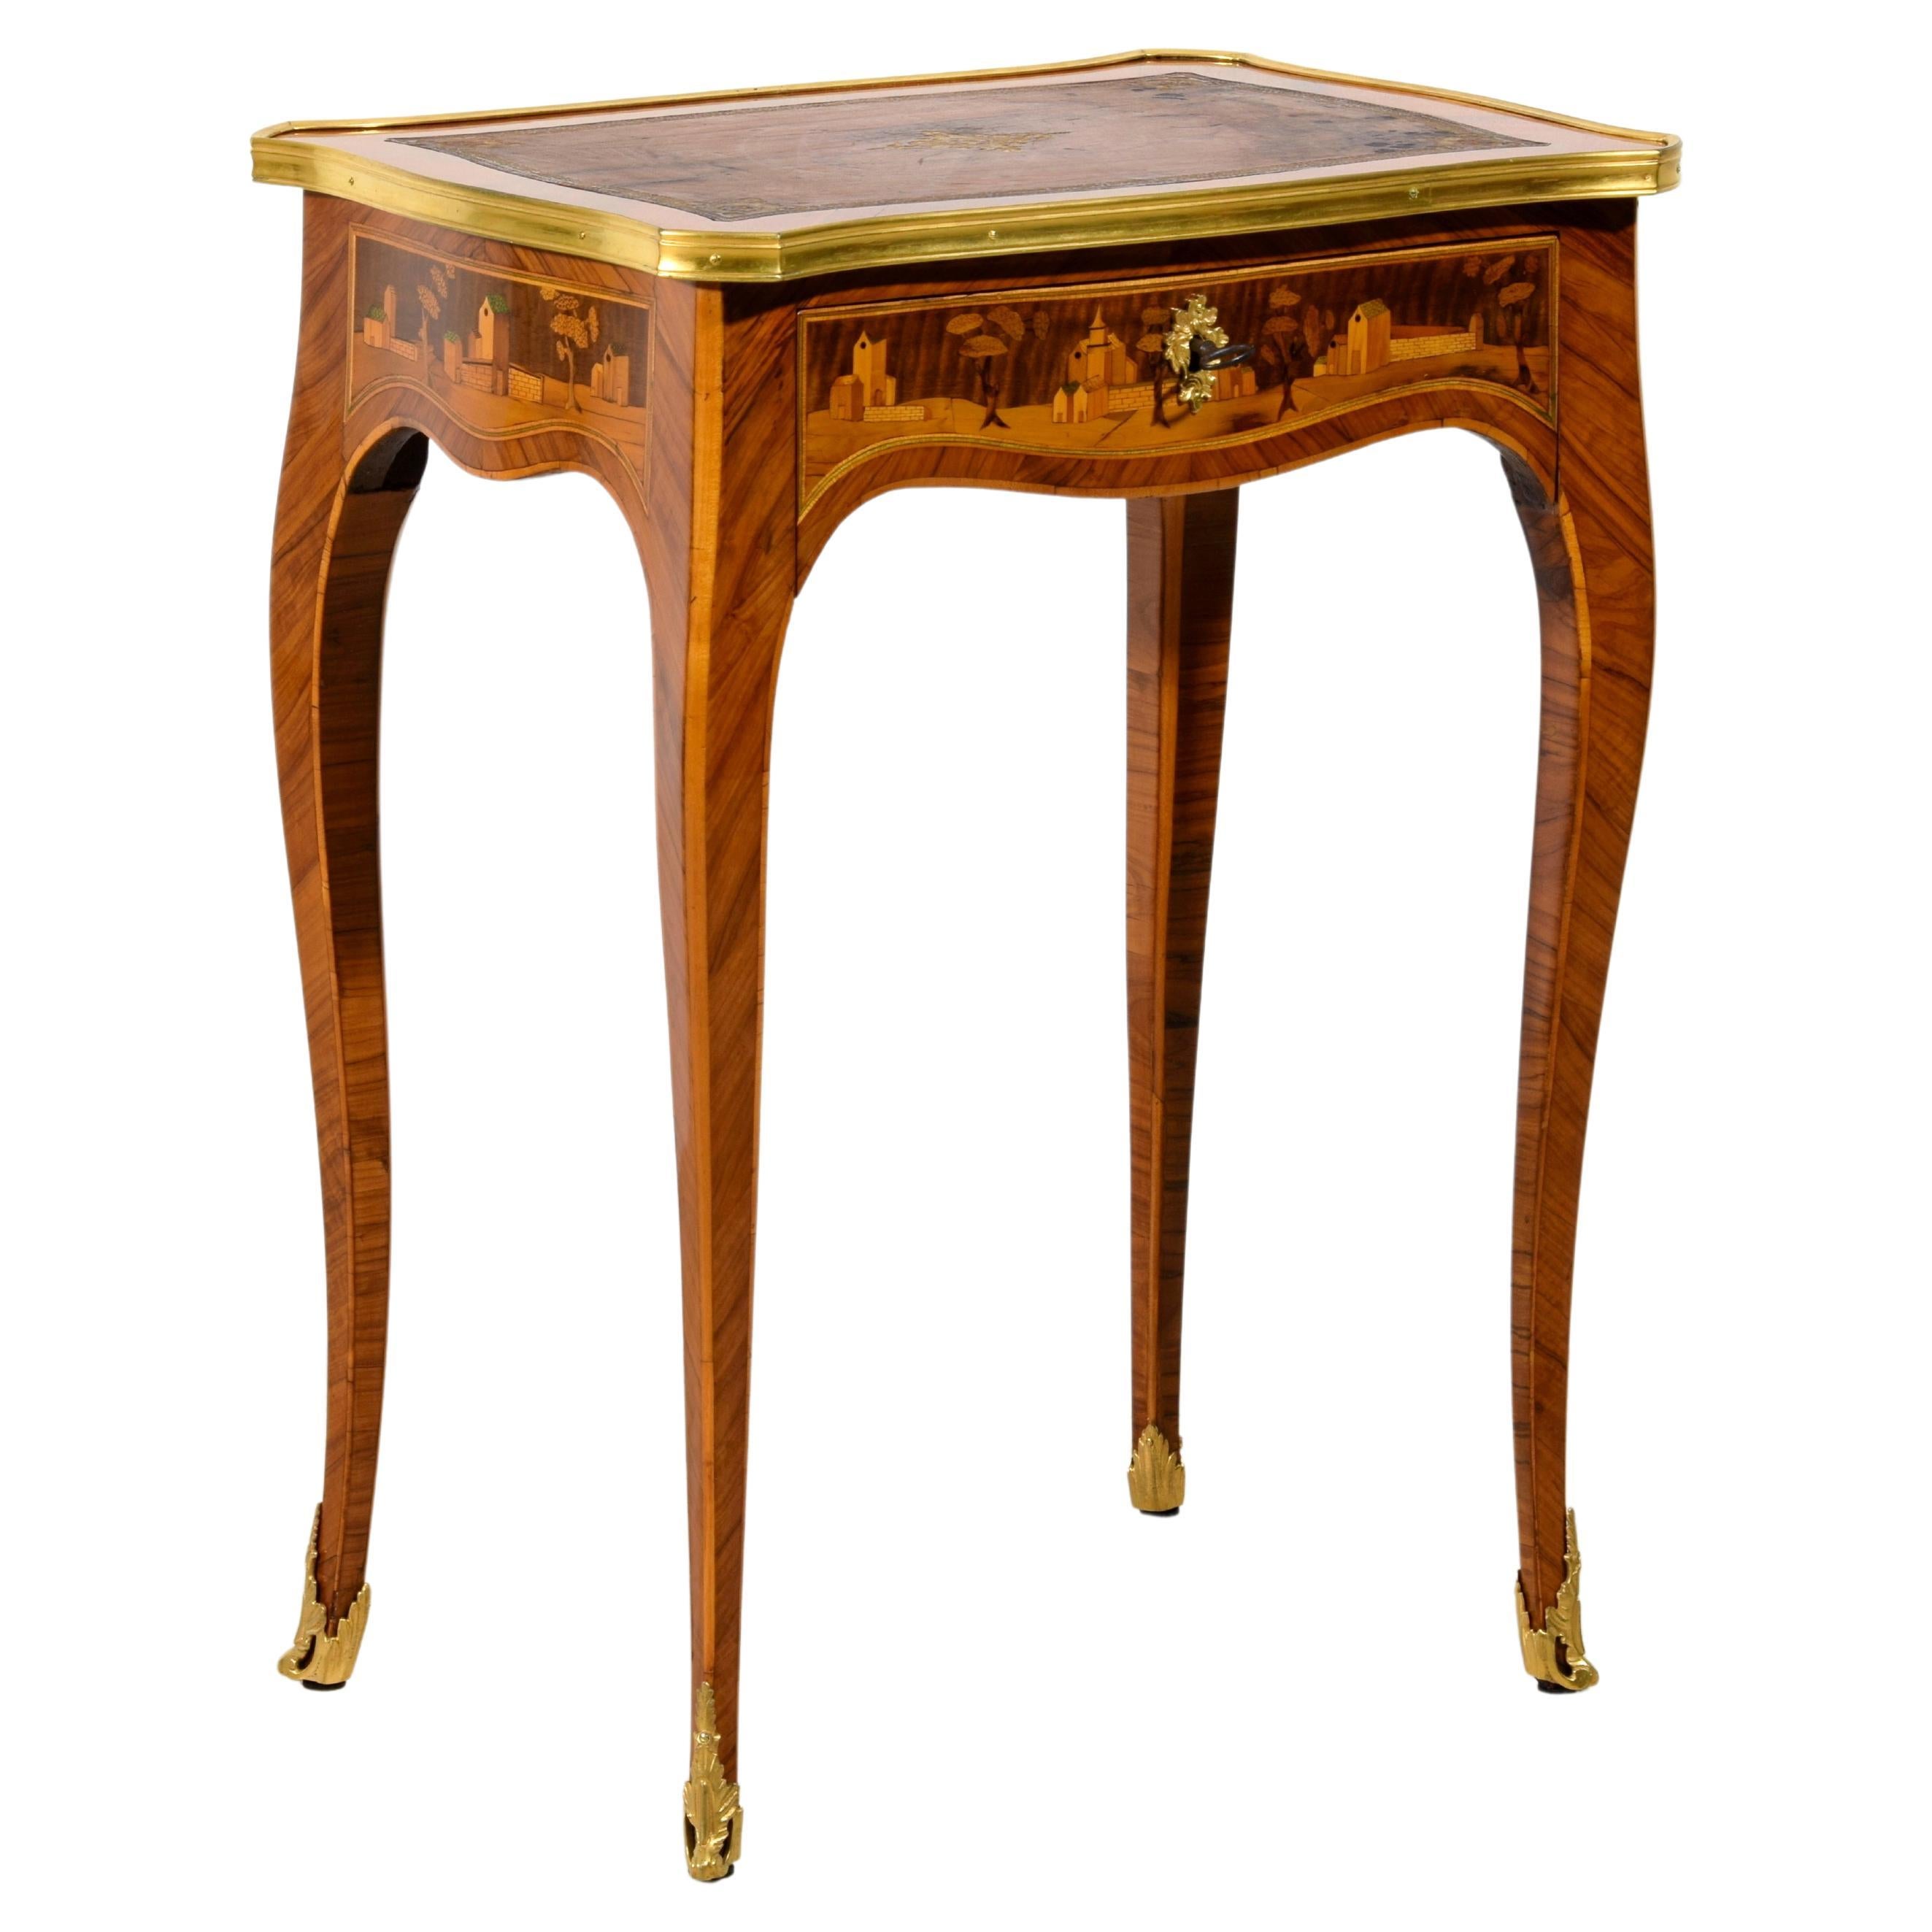 19th Century, France Inlaid Wood Centre Table